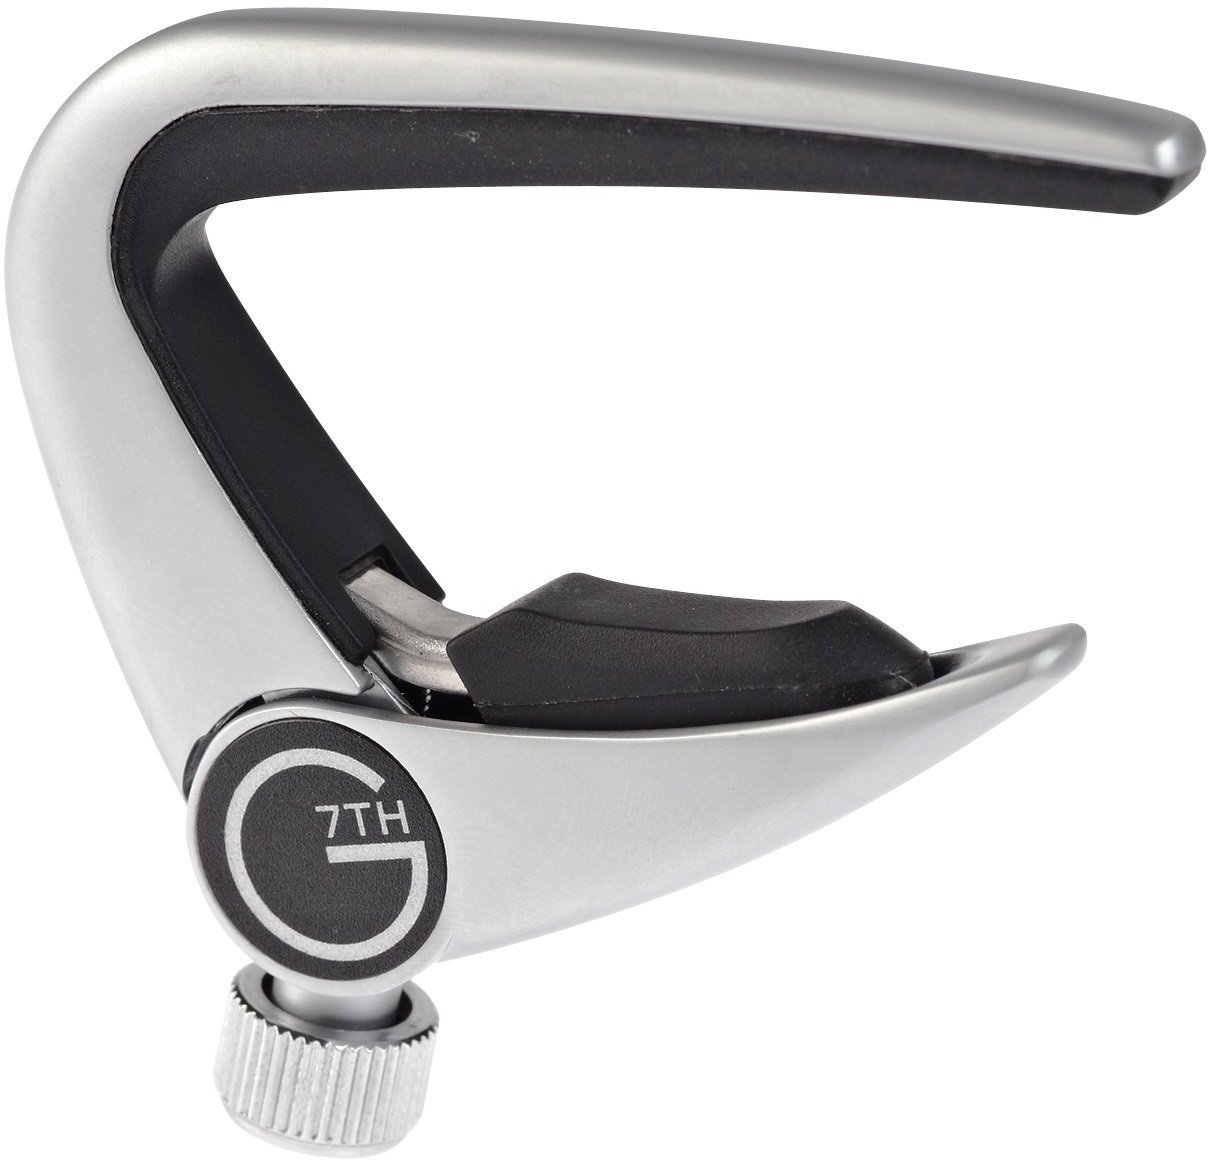 Acoustic Guitar Capo G7th Newport Lightweight